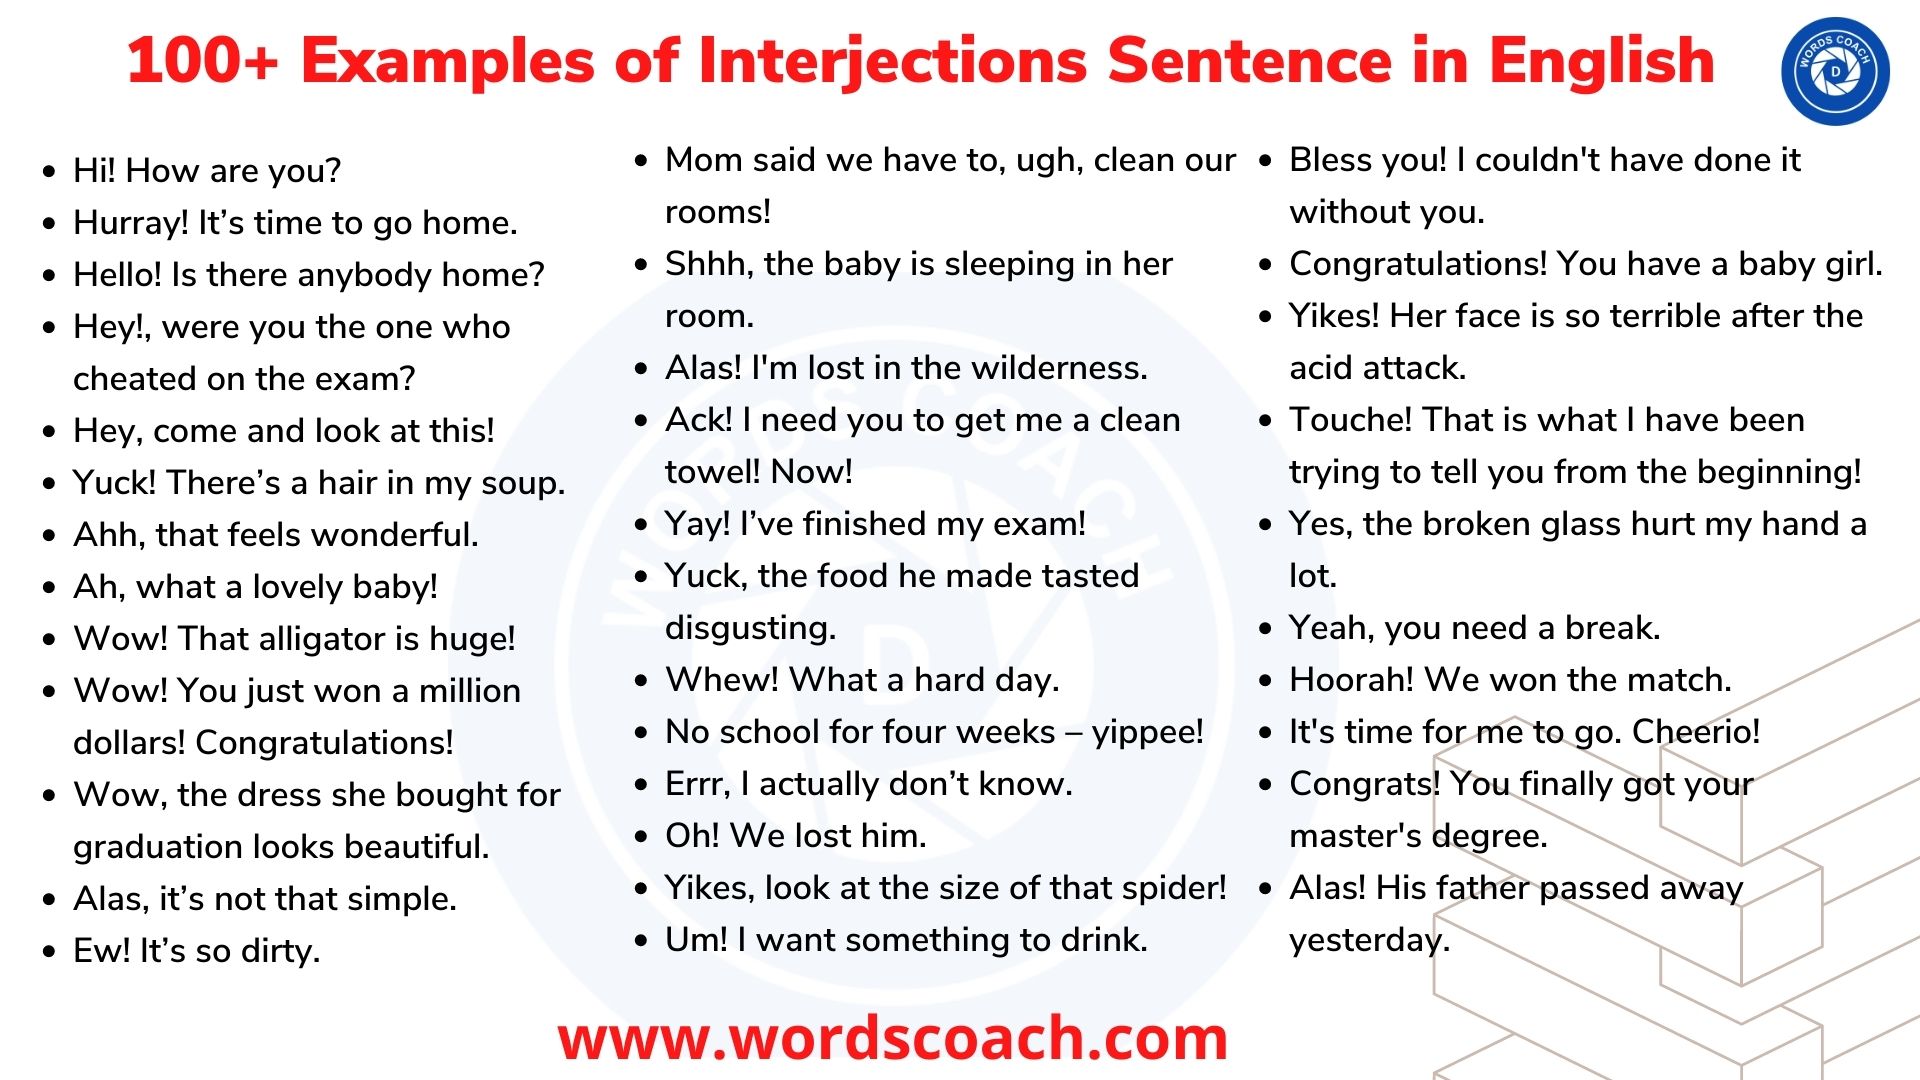 Interjections Sentence: 100+ Examples of Interjections Sentence in English  - Word Coach